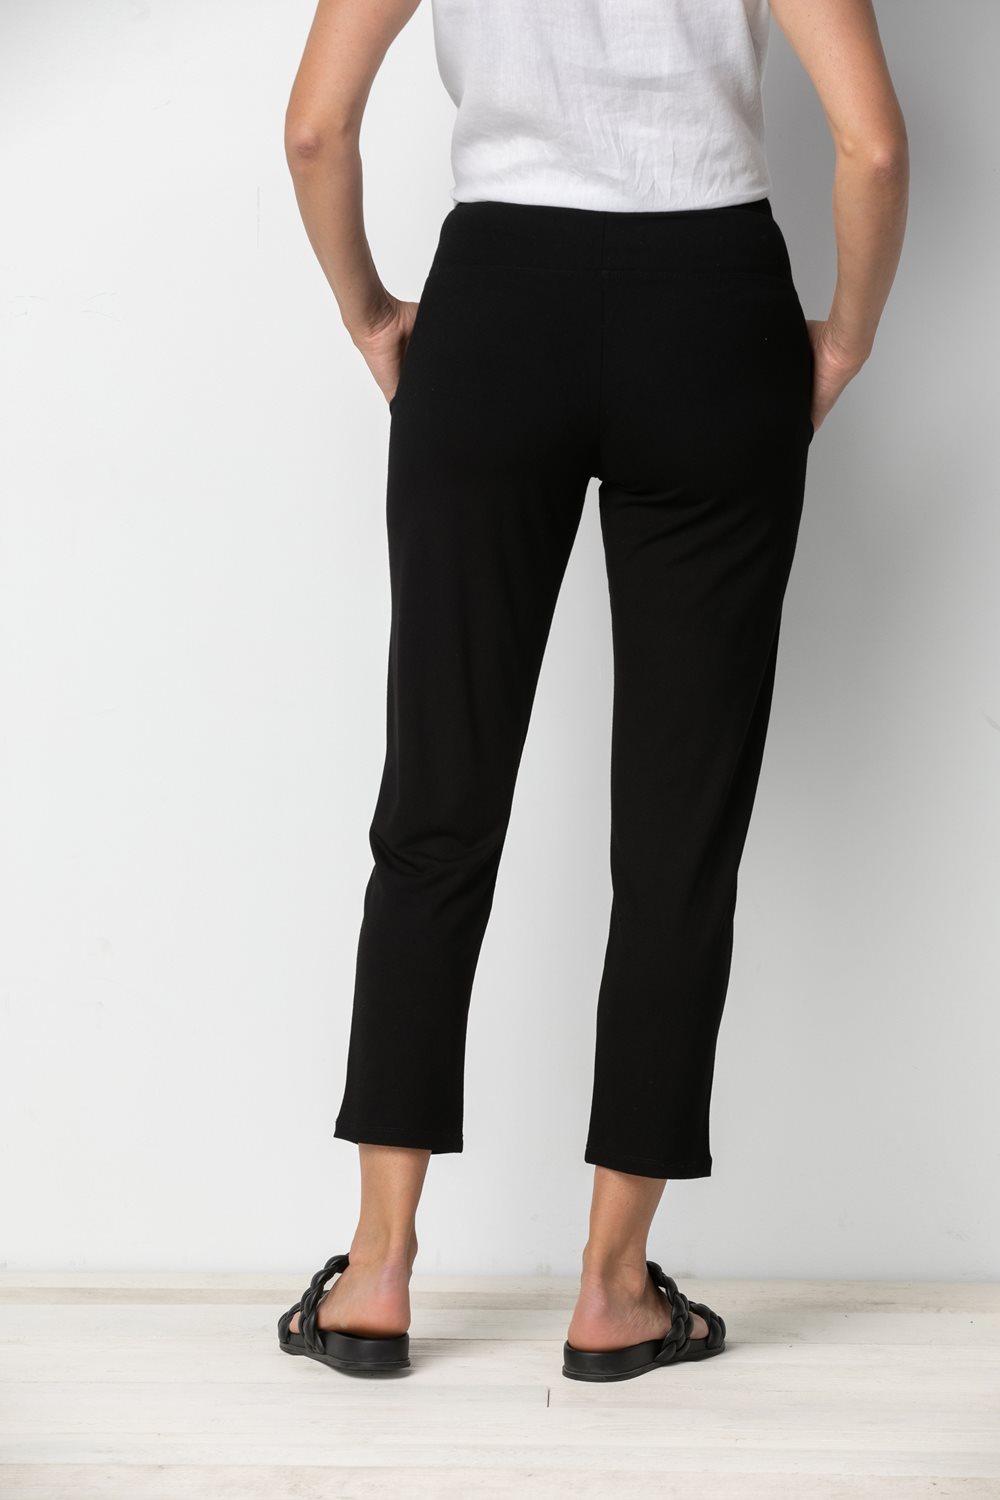 Friday FWD Women's Travel Stretch Tapered Pant - FRIDAYFWD - KEYLOOK - 1